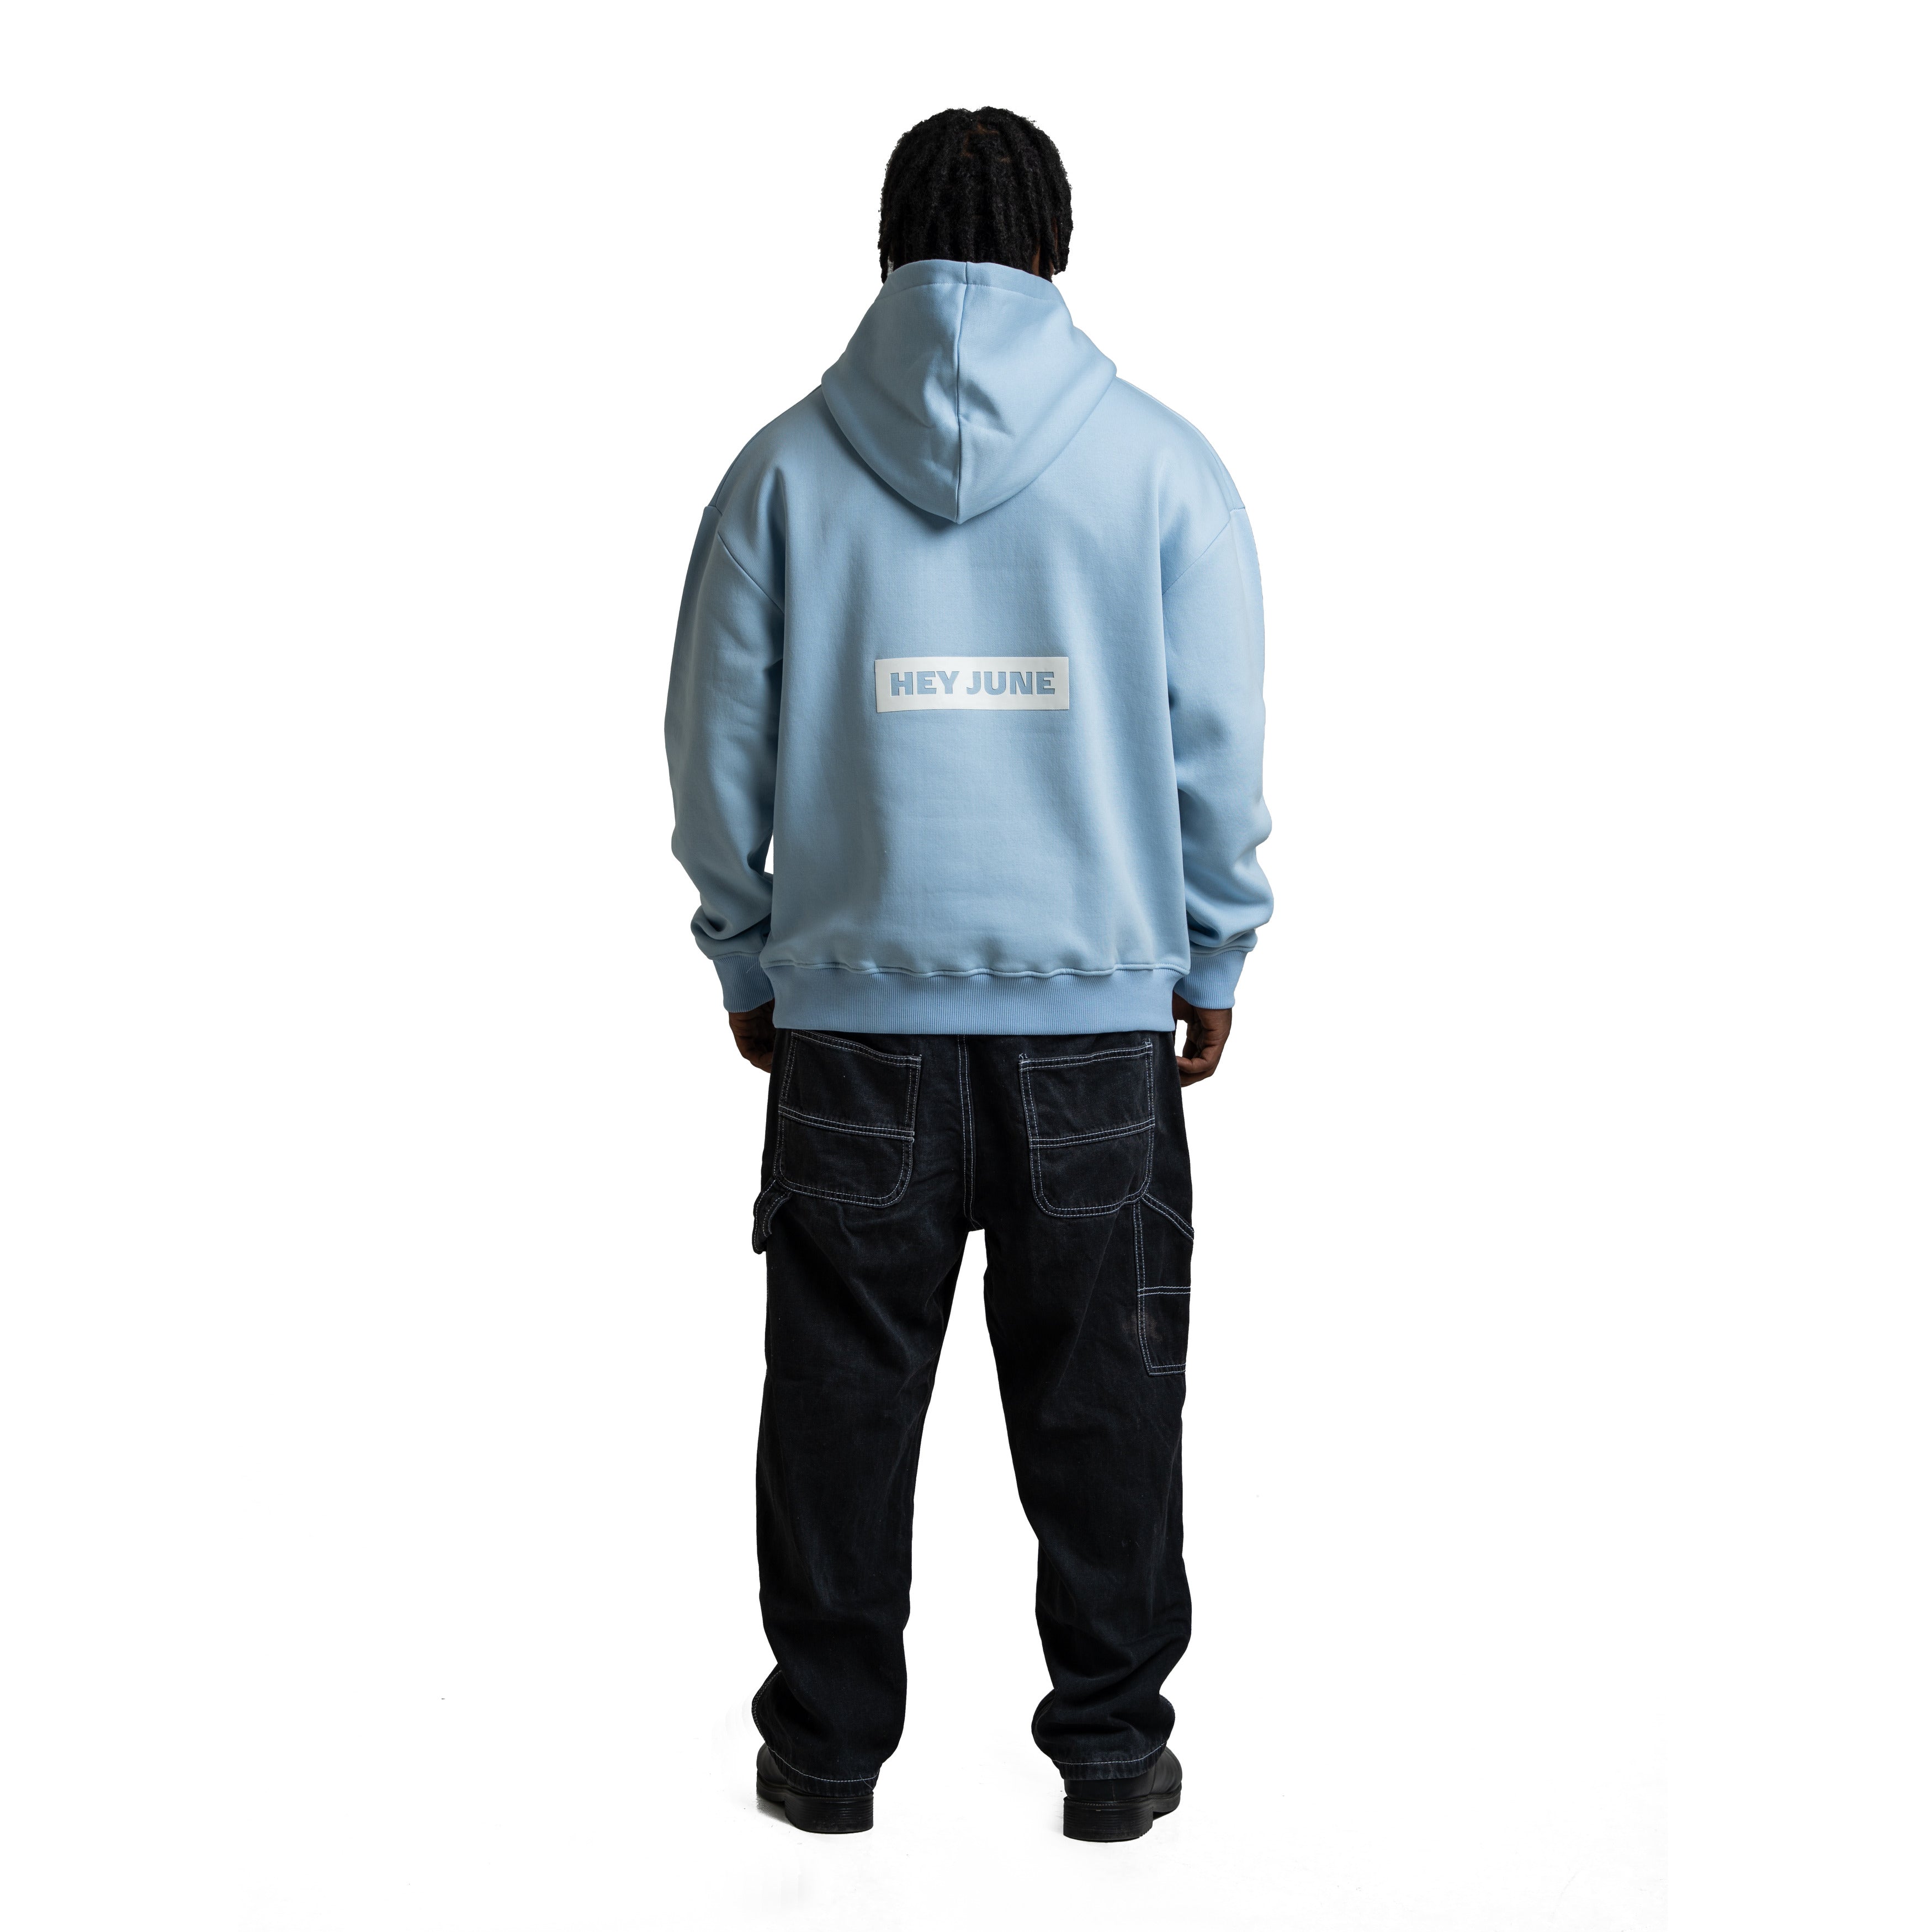 The Pop UP Selectives June Hoodie